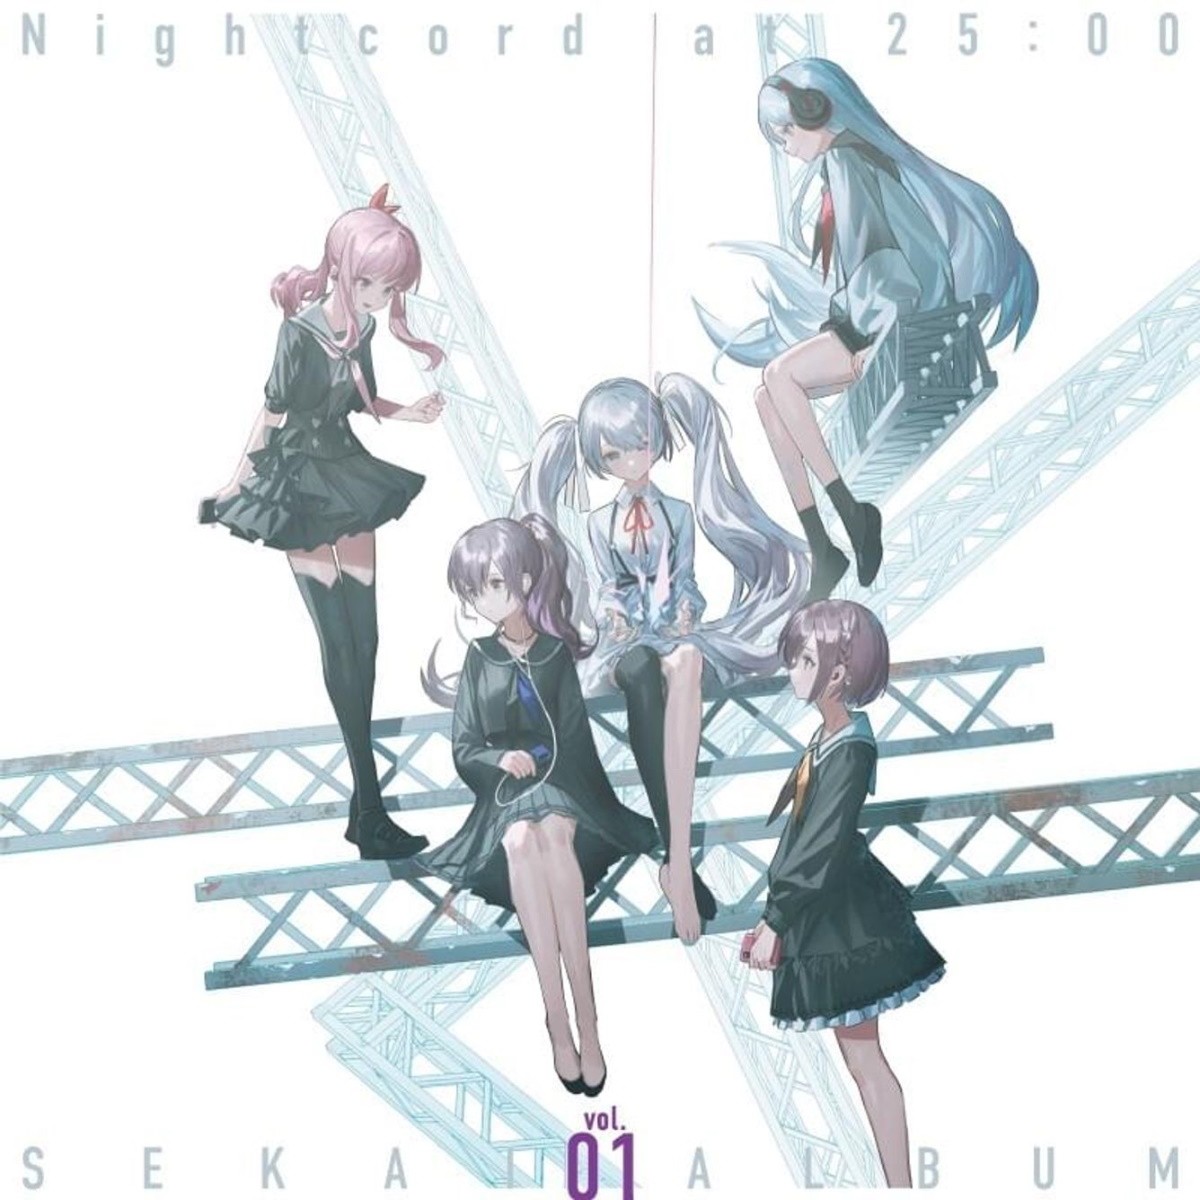 Cover for『Nightcord at 25:00 - Cutlery』from the release『Nightcord at 25:00 SEKAI ALBUM vol.1』